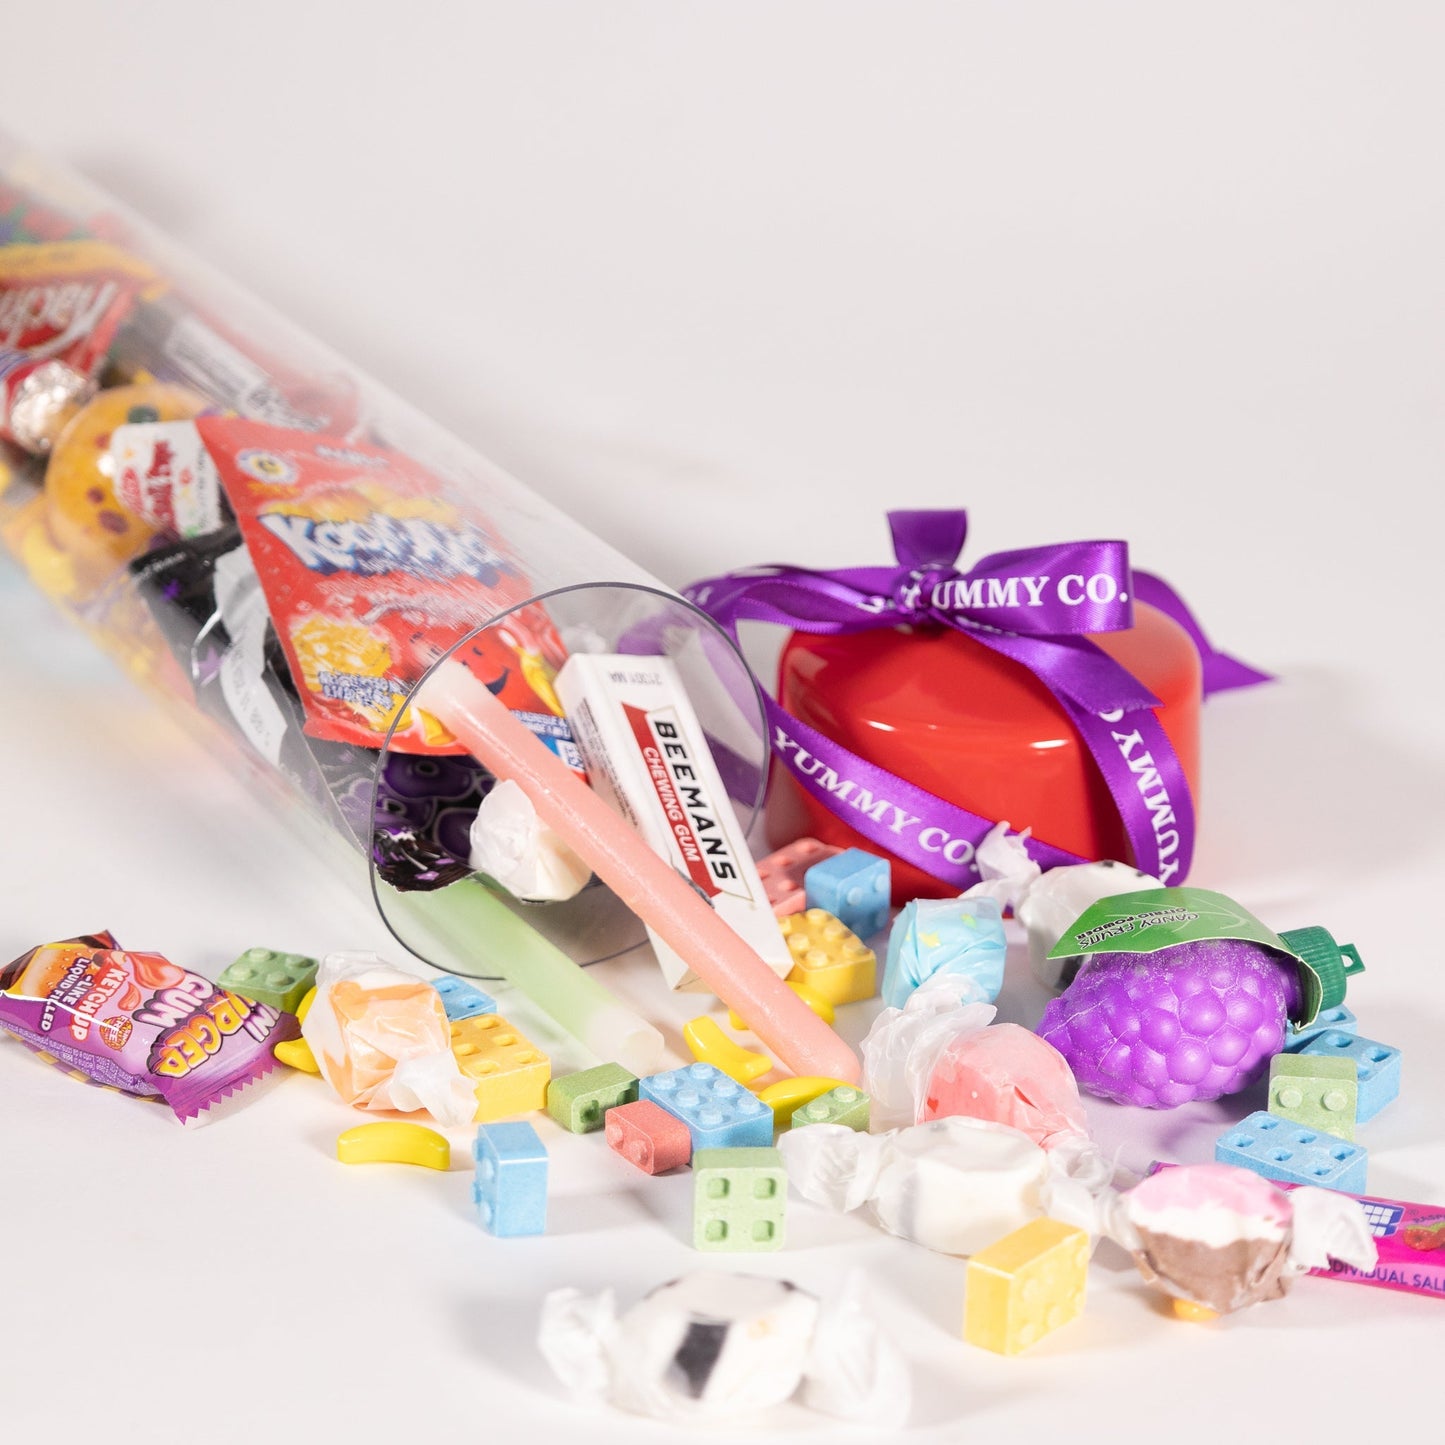 1980s Candy Time Capsule